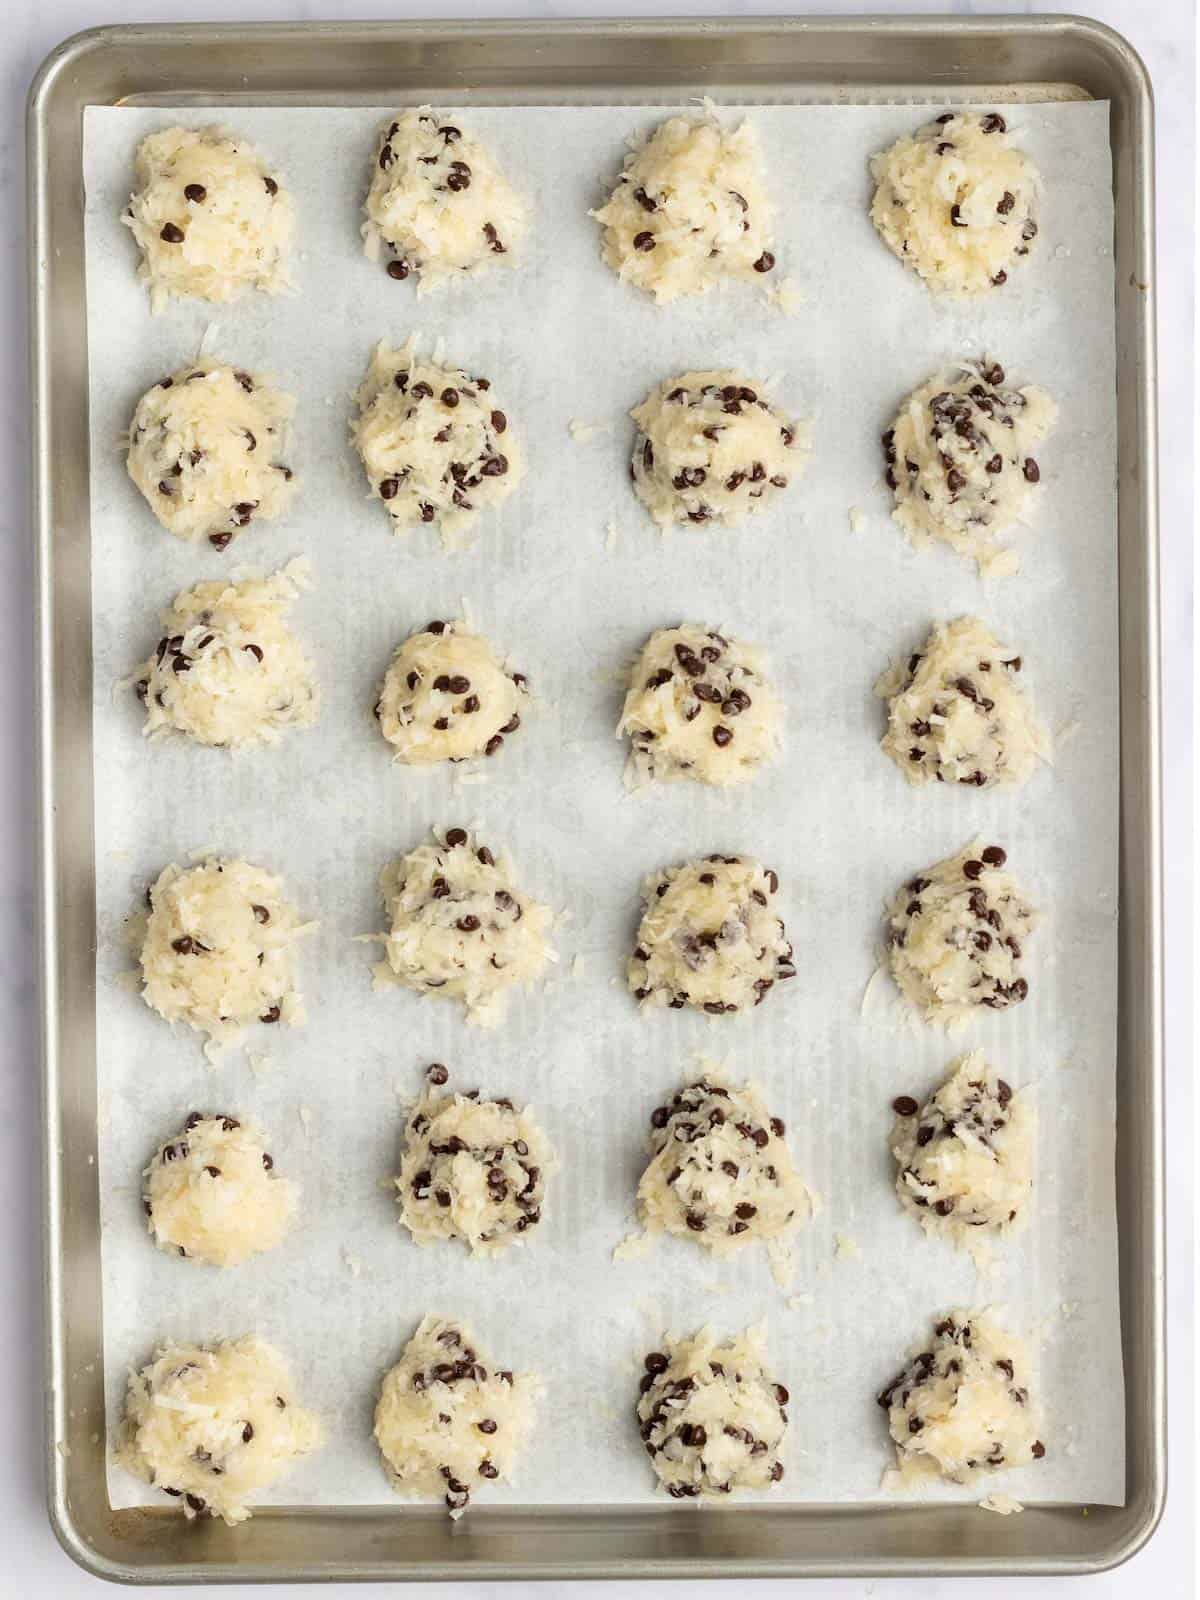 Cookie batter scooped into rounds and placed in rows on cookie sheet waiting to be baked in the oven.